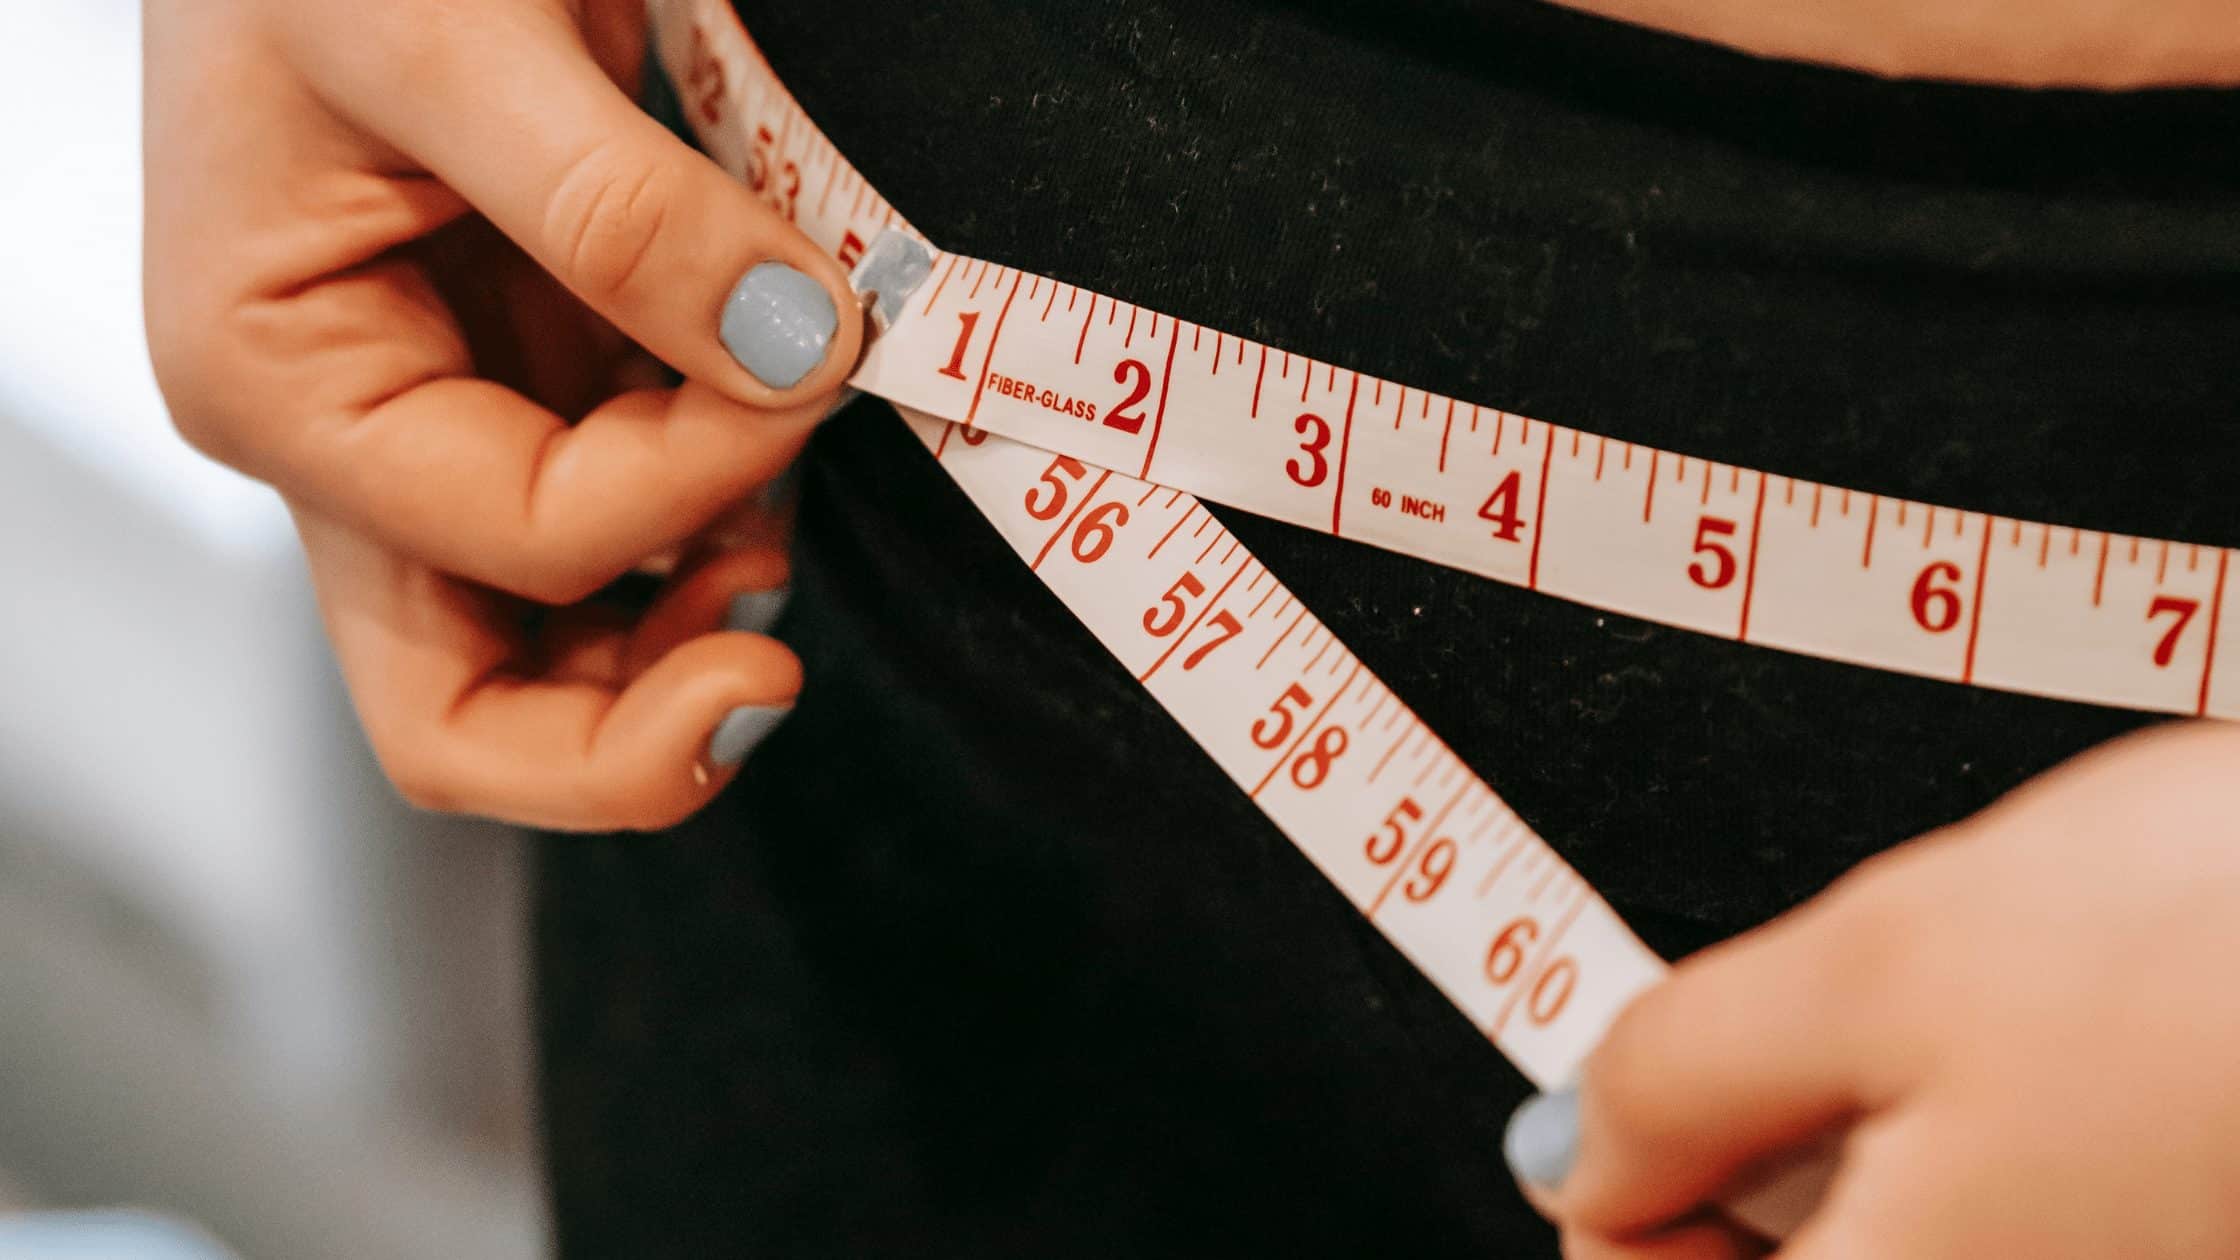 female measuring her waistline with measuring tape